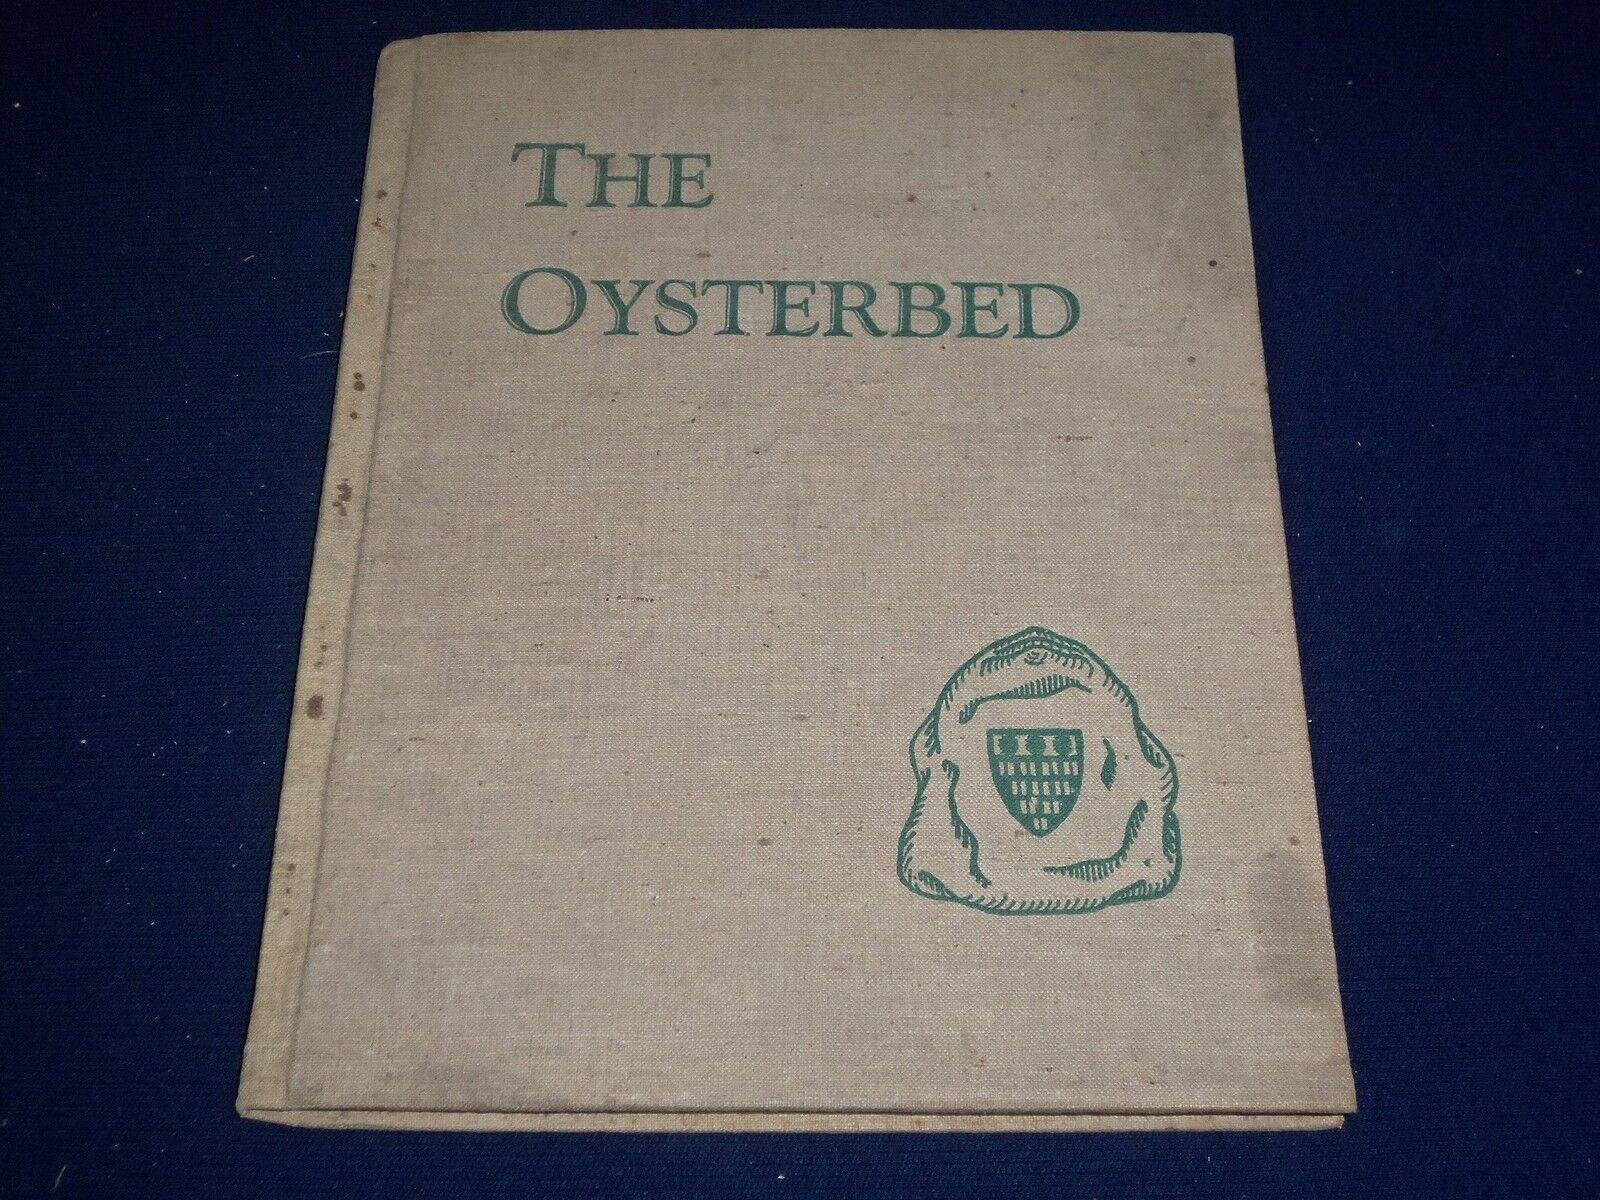 1940 THE OYSTERBED HARDCOVER BOOK - BRANDFORD COLLEGE - 1ST EDITION - KD 1753